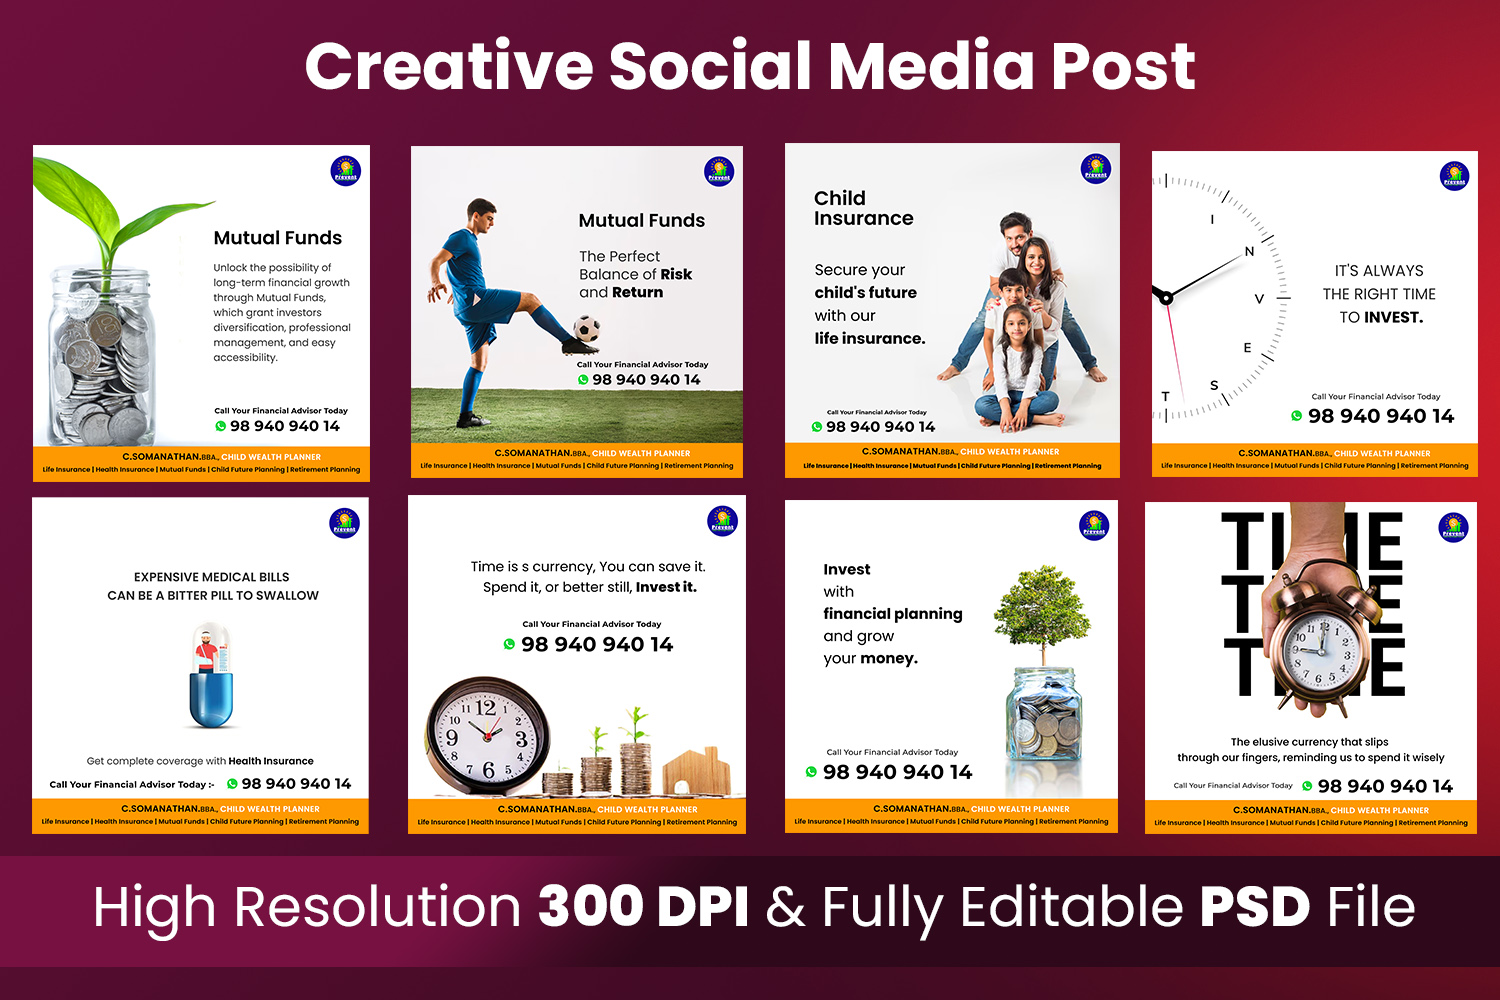 Social Media Post Template pinterest preview image.